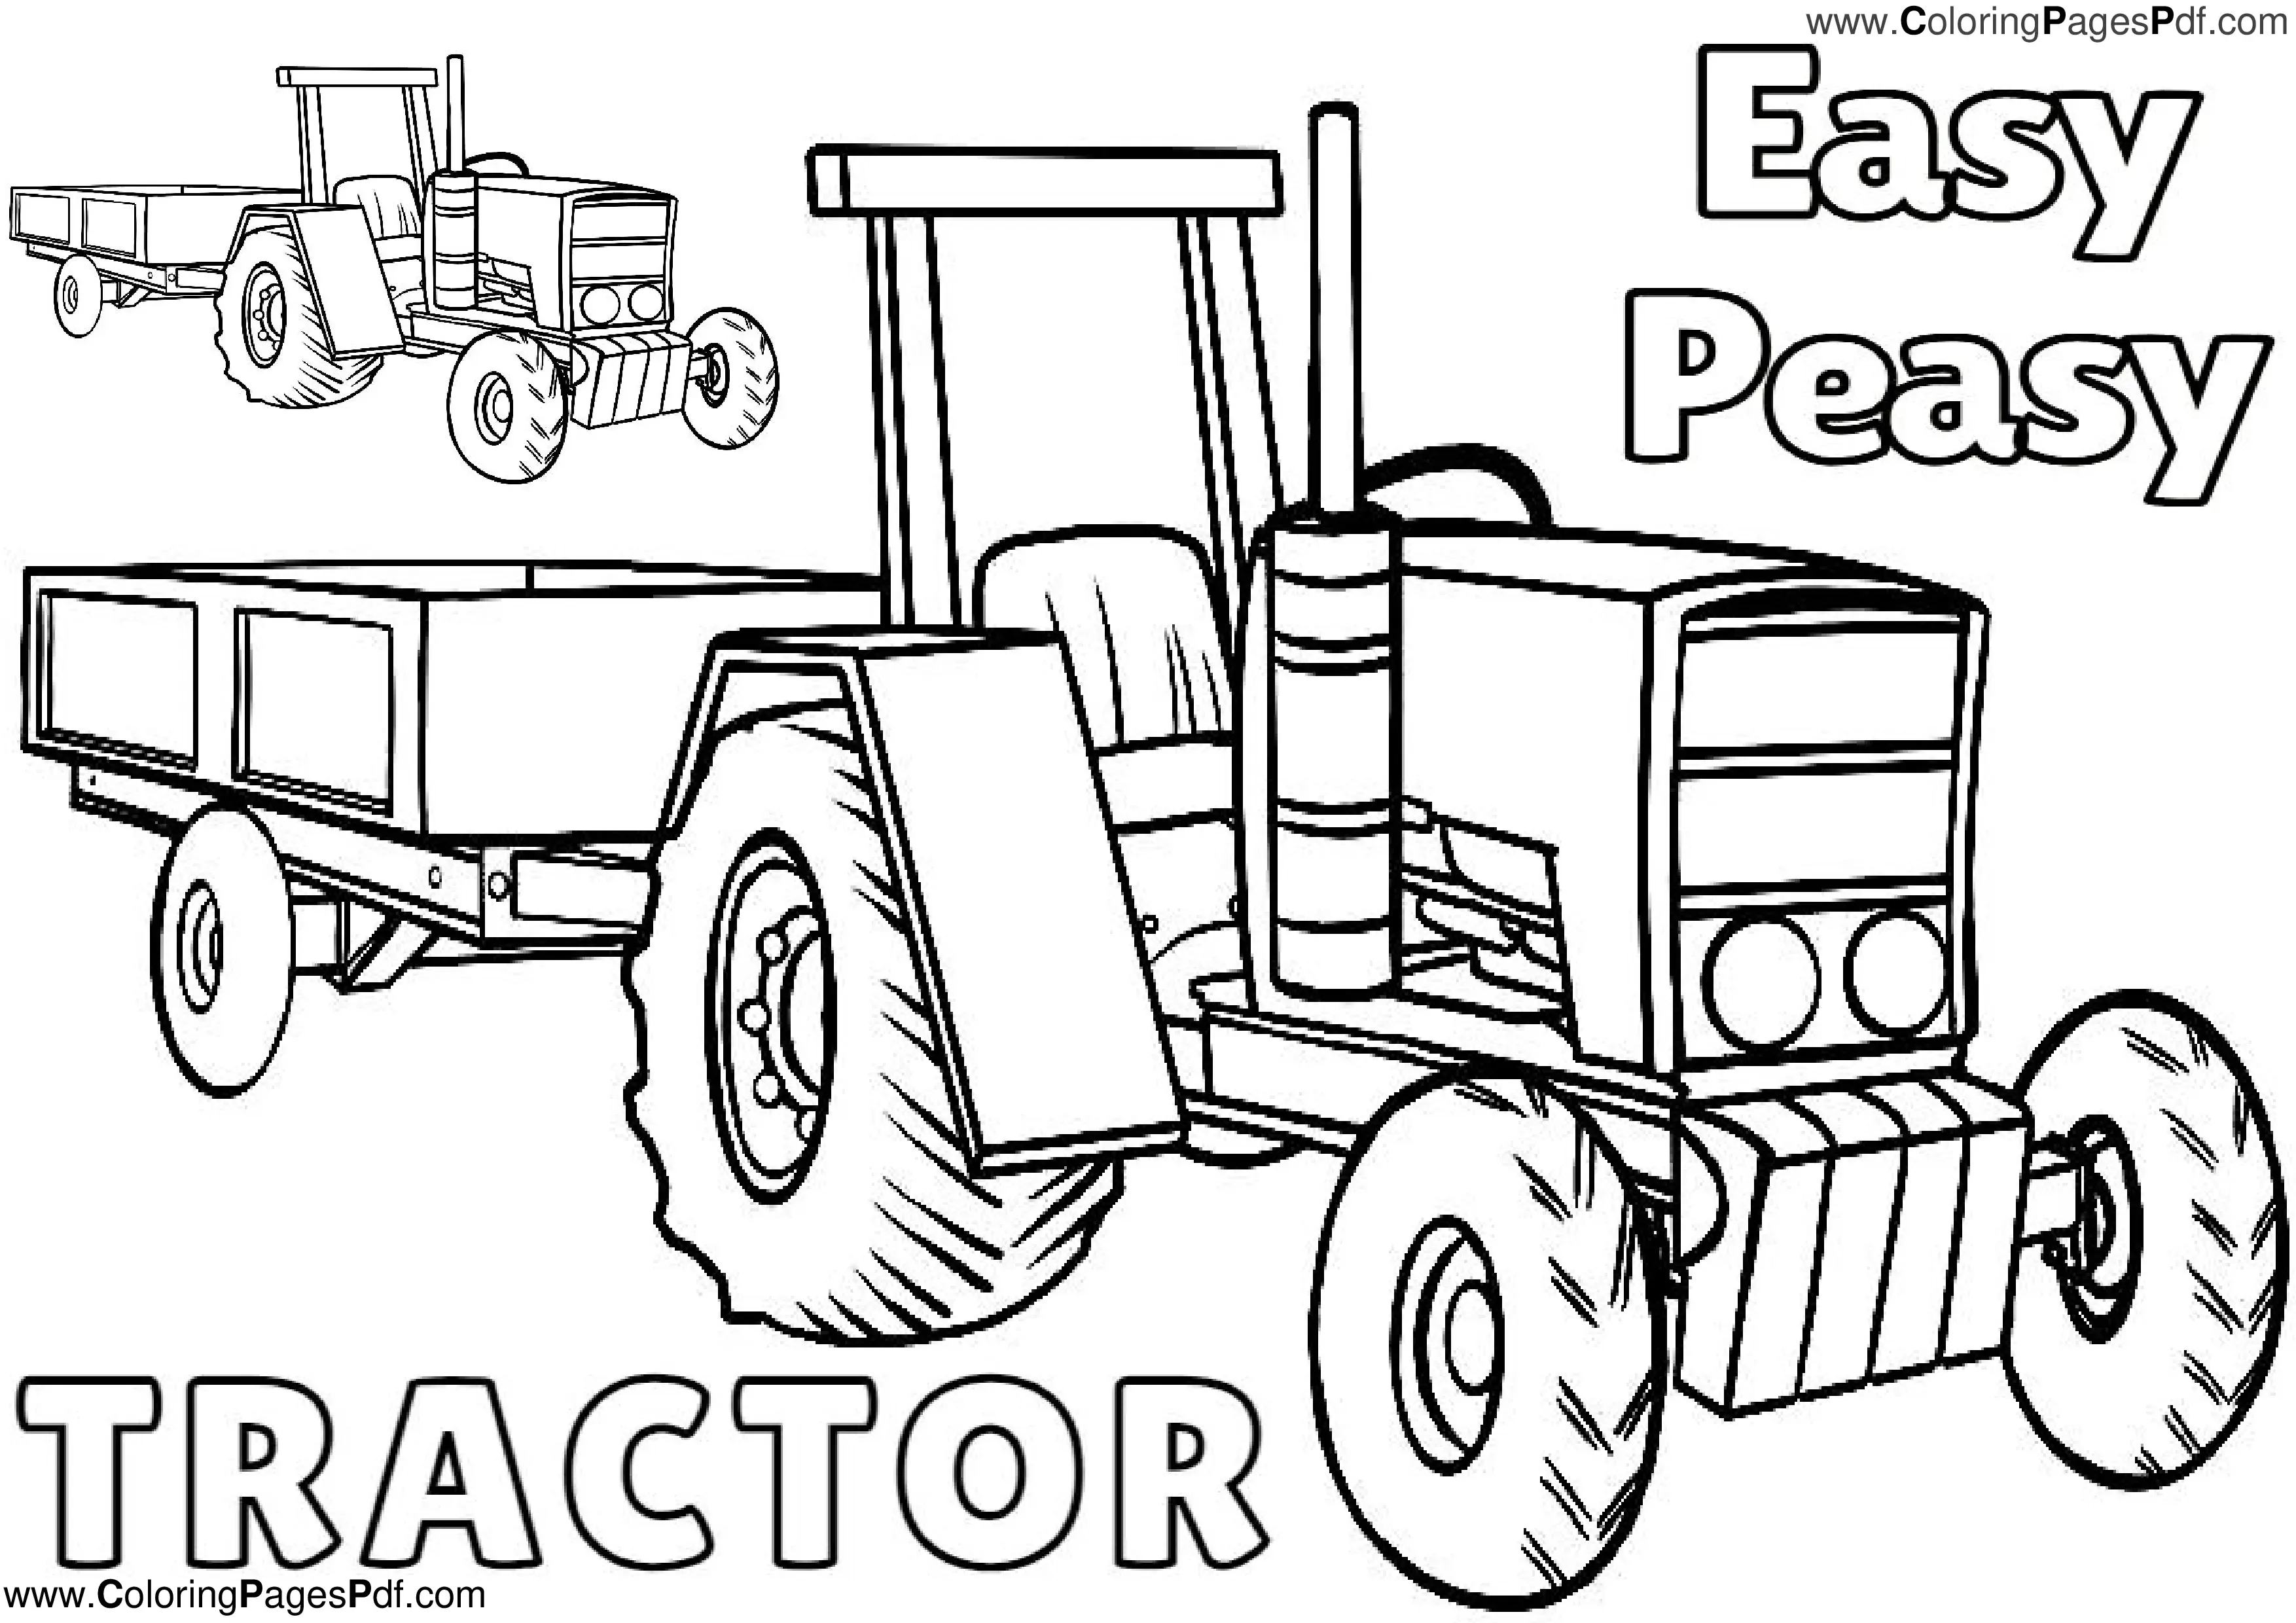 Easy tractor coloring pages